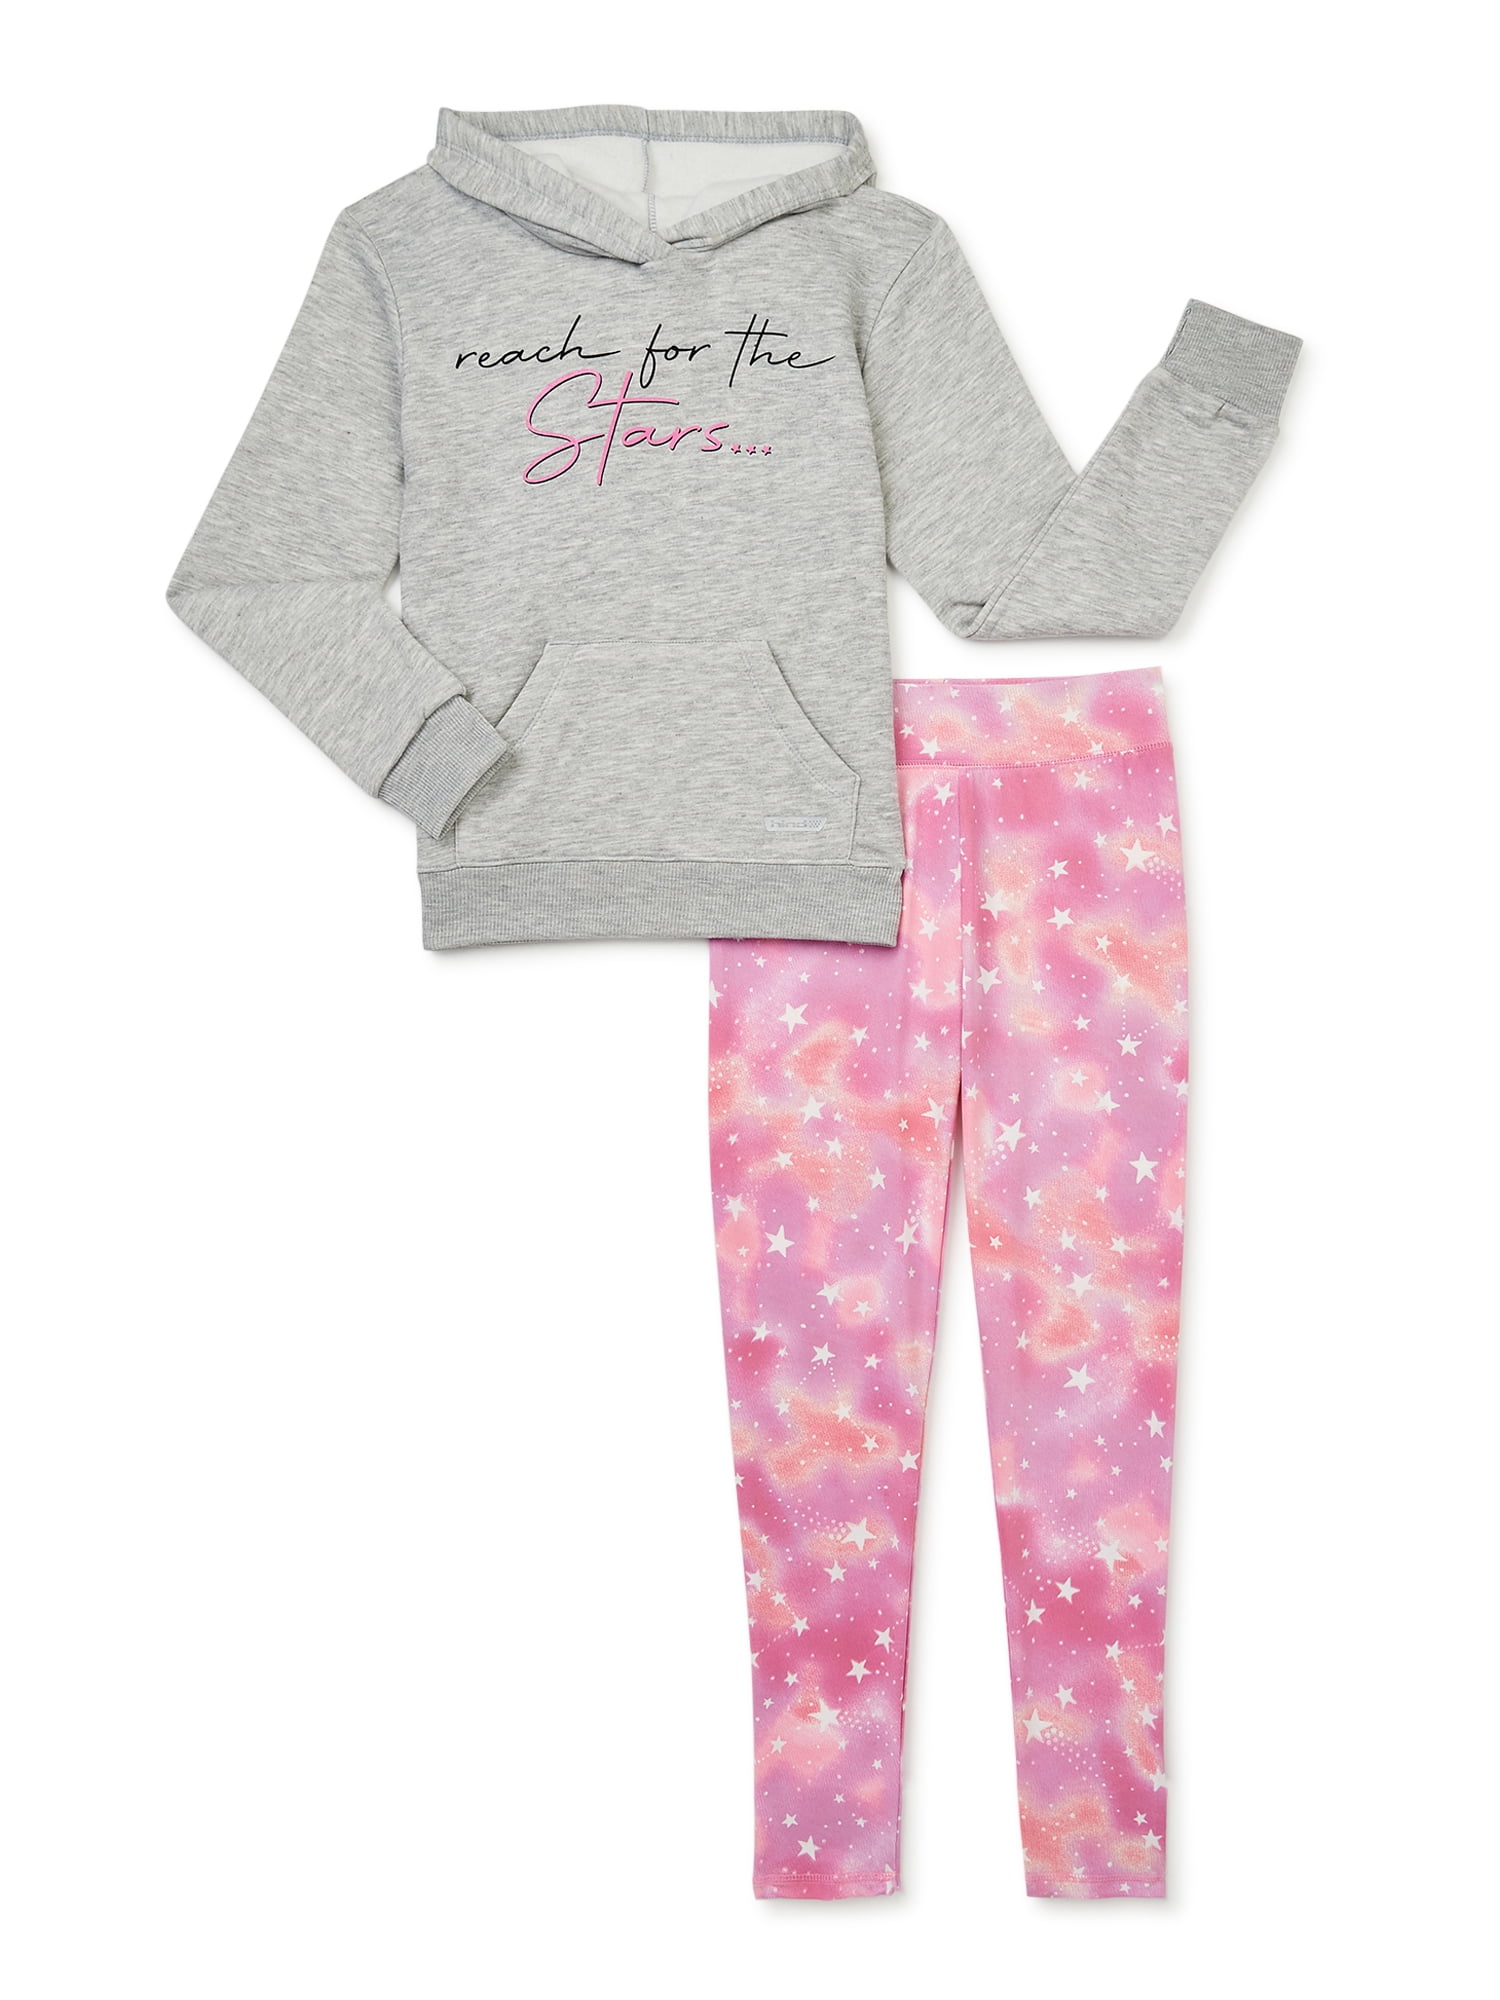 Hind Girls Hoodie and Leggings, 2-Piece Active Set, Sizes 4-16 ...